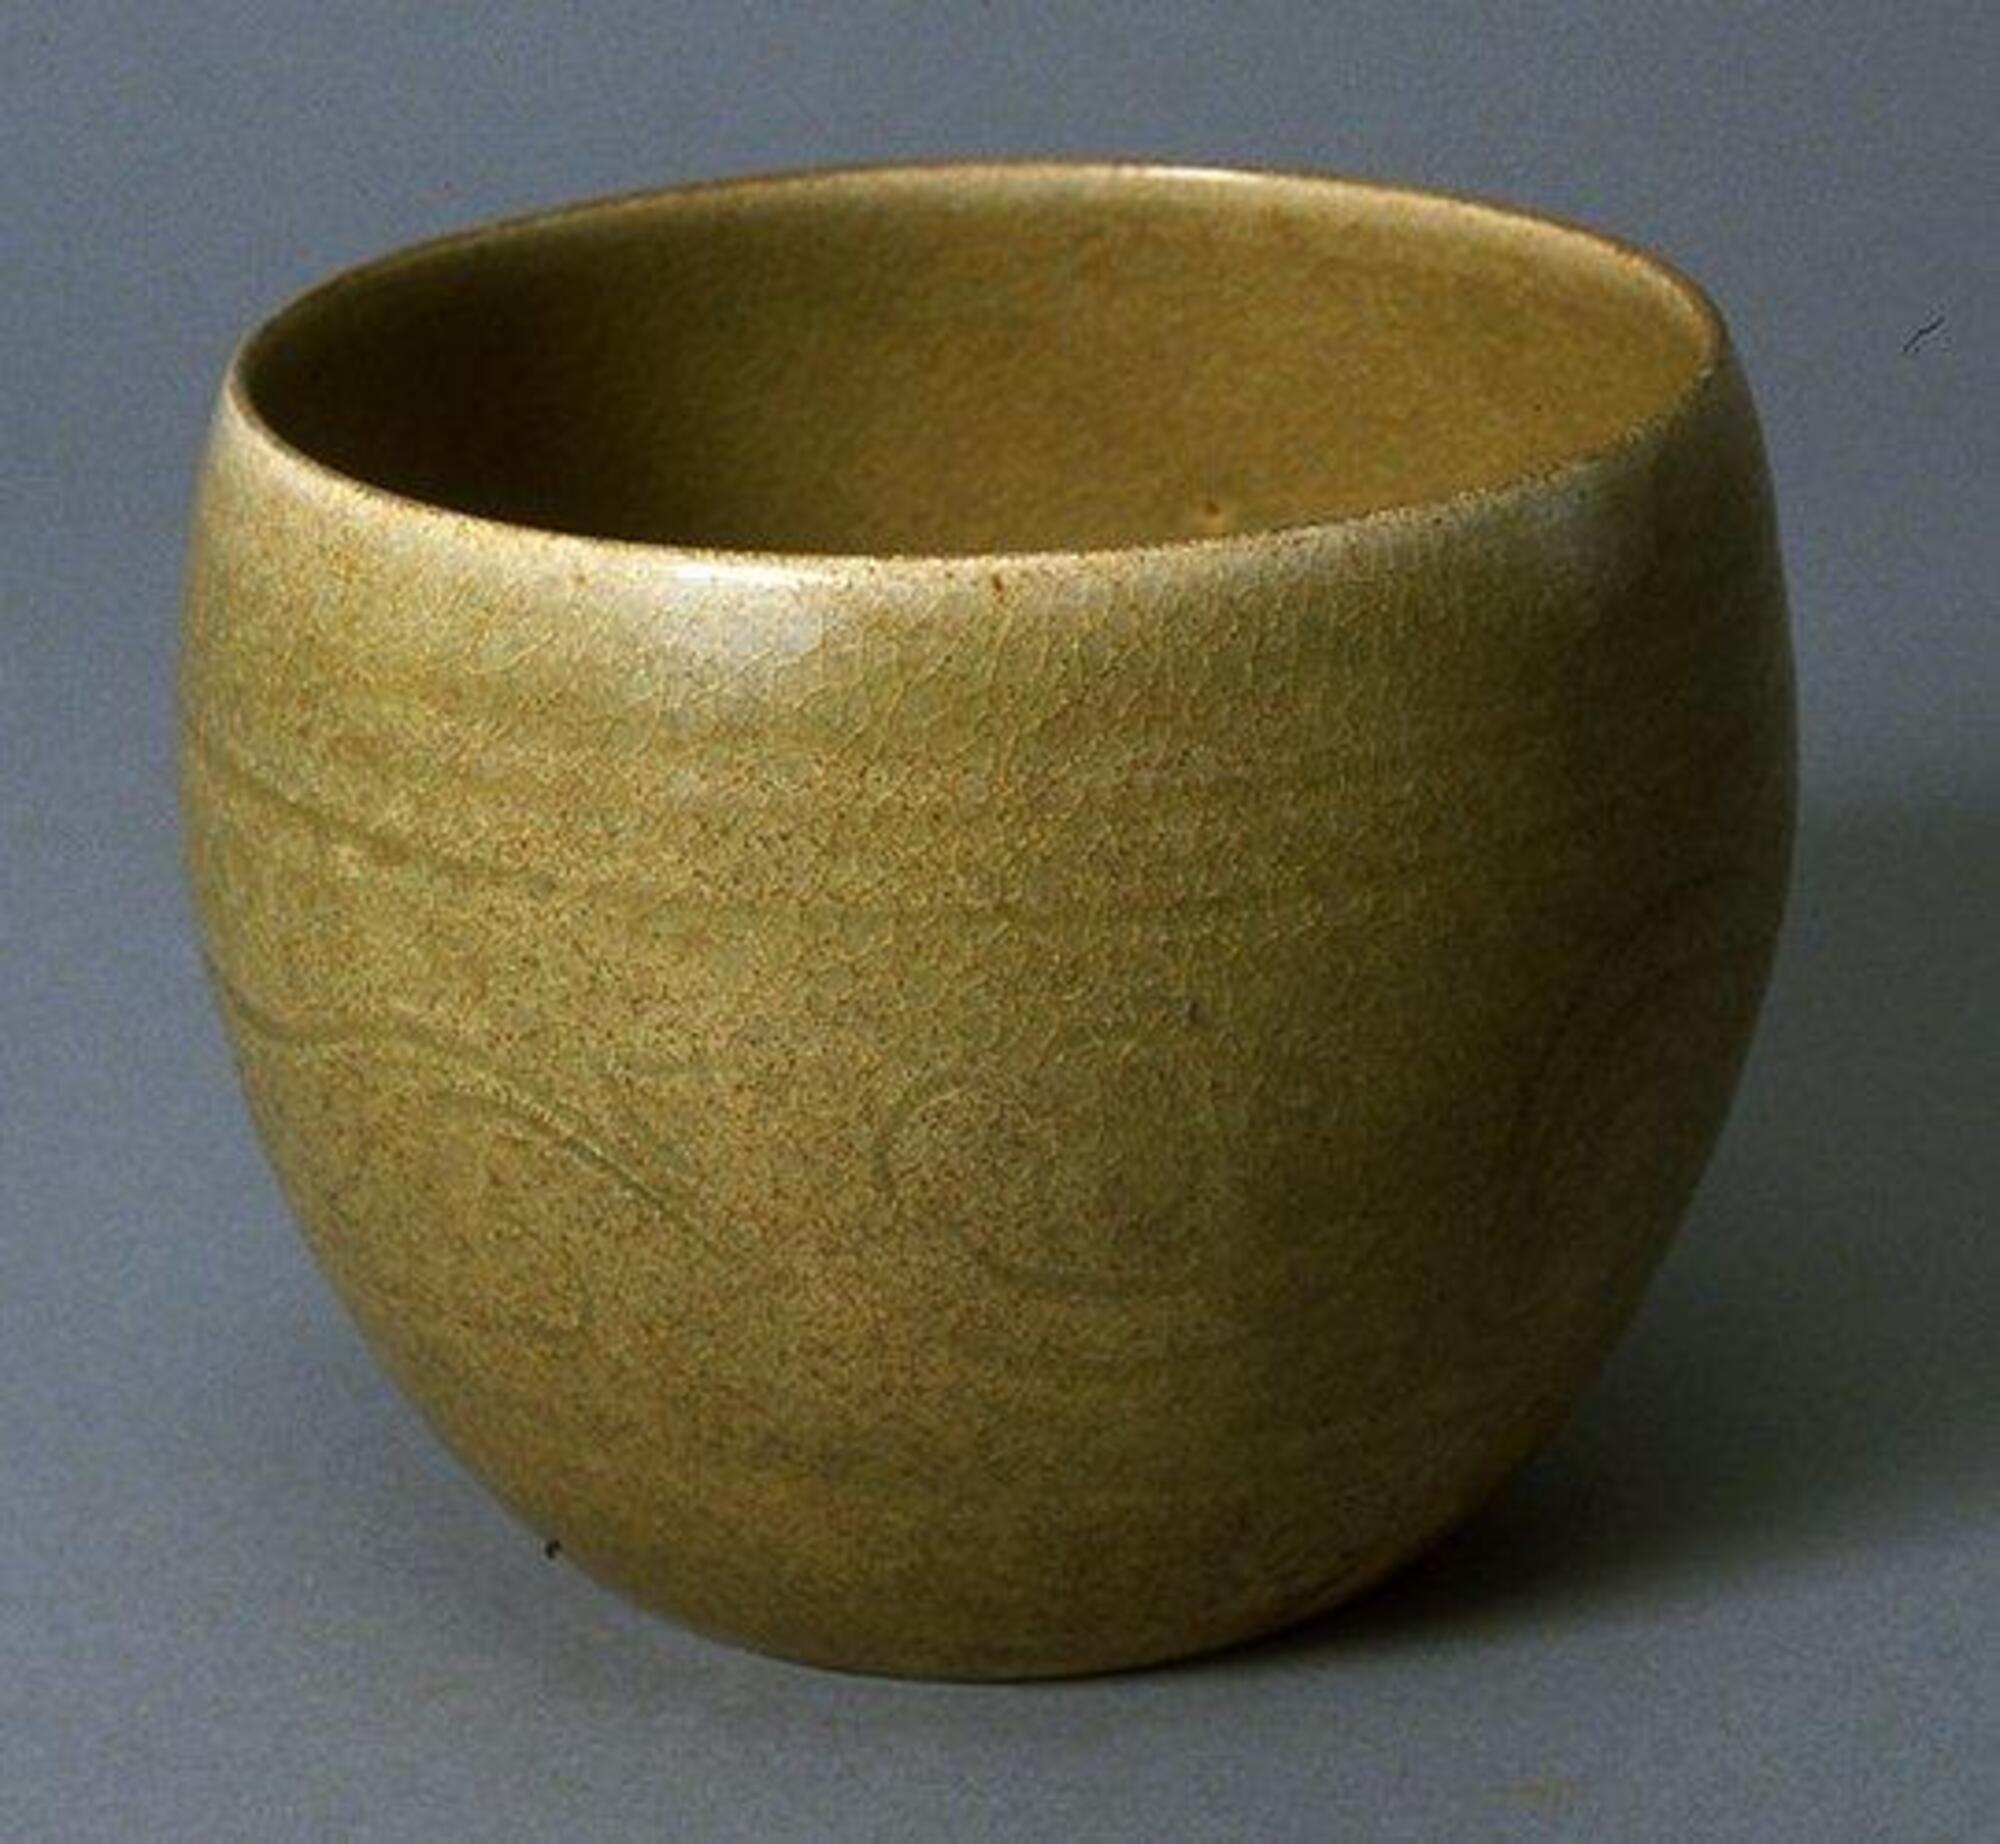 A finely potted stoneware beaker with a rounded bottom and a lightly incised, freely drawn leaf scroll spreading across the widest part of the body, flanked by incised double horizontal lines, all covered evenly with an yellow green glaze. Four spur markes inside.